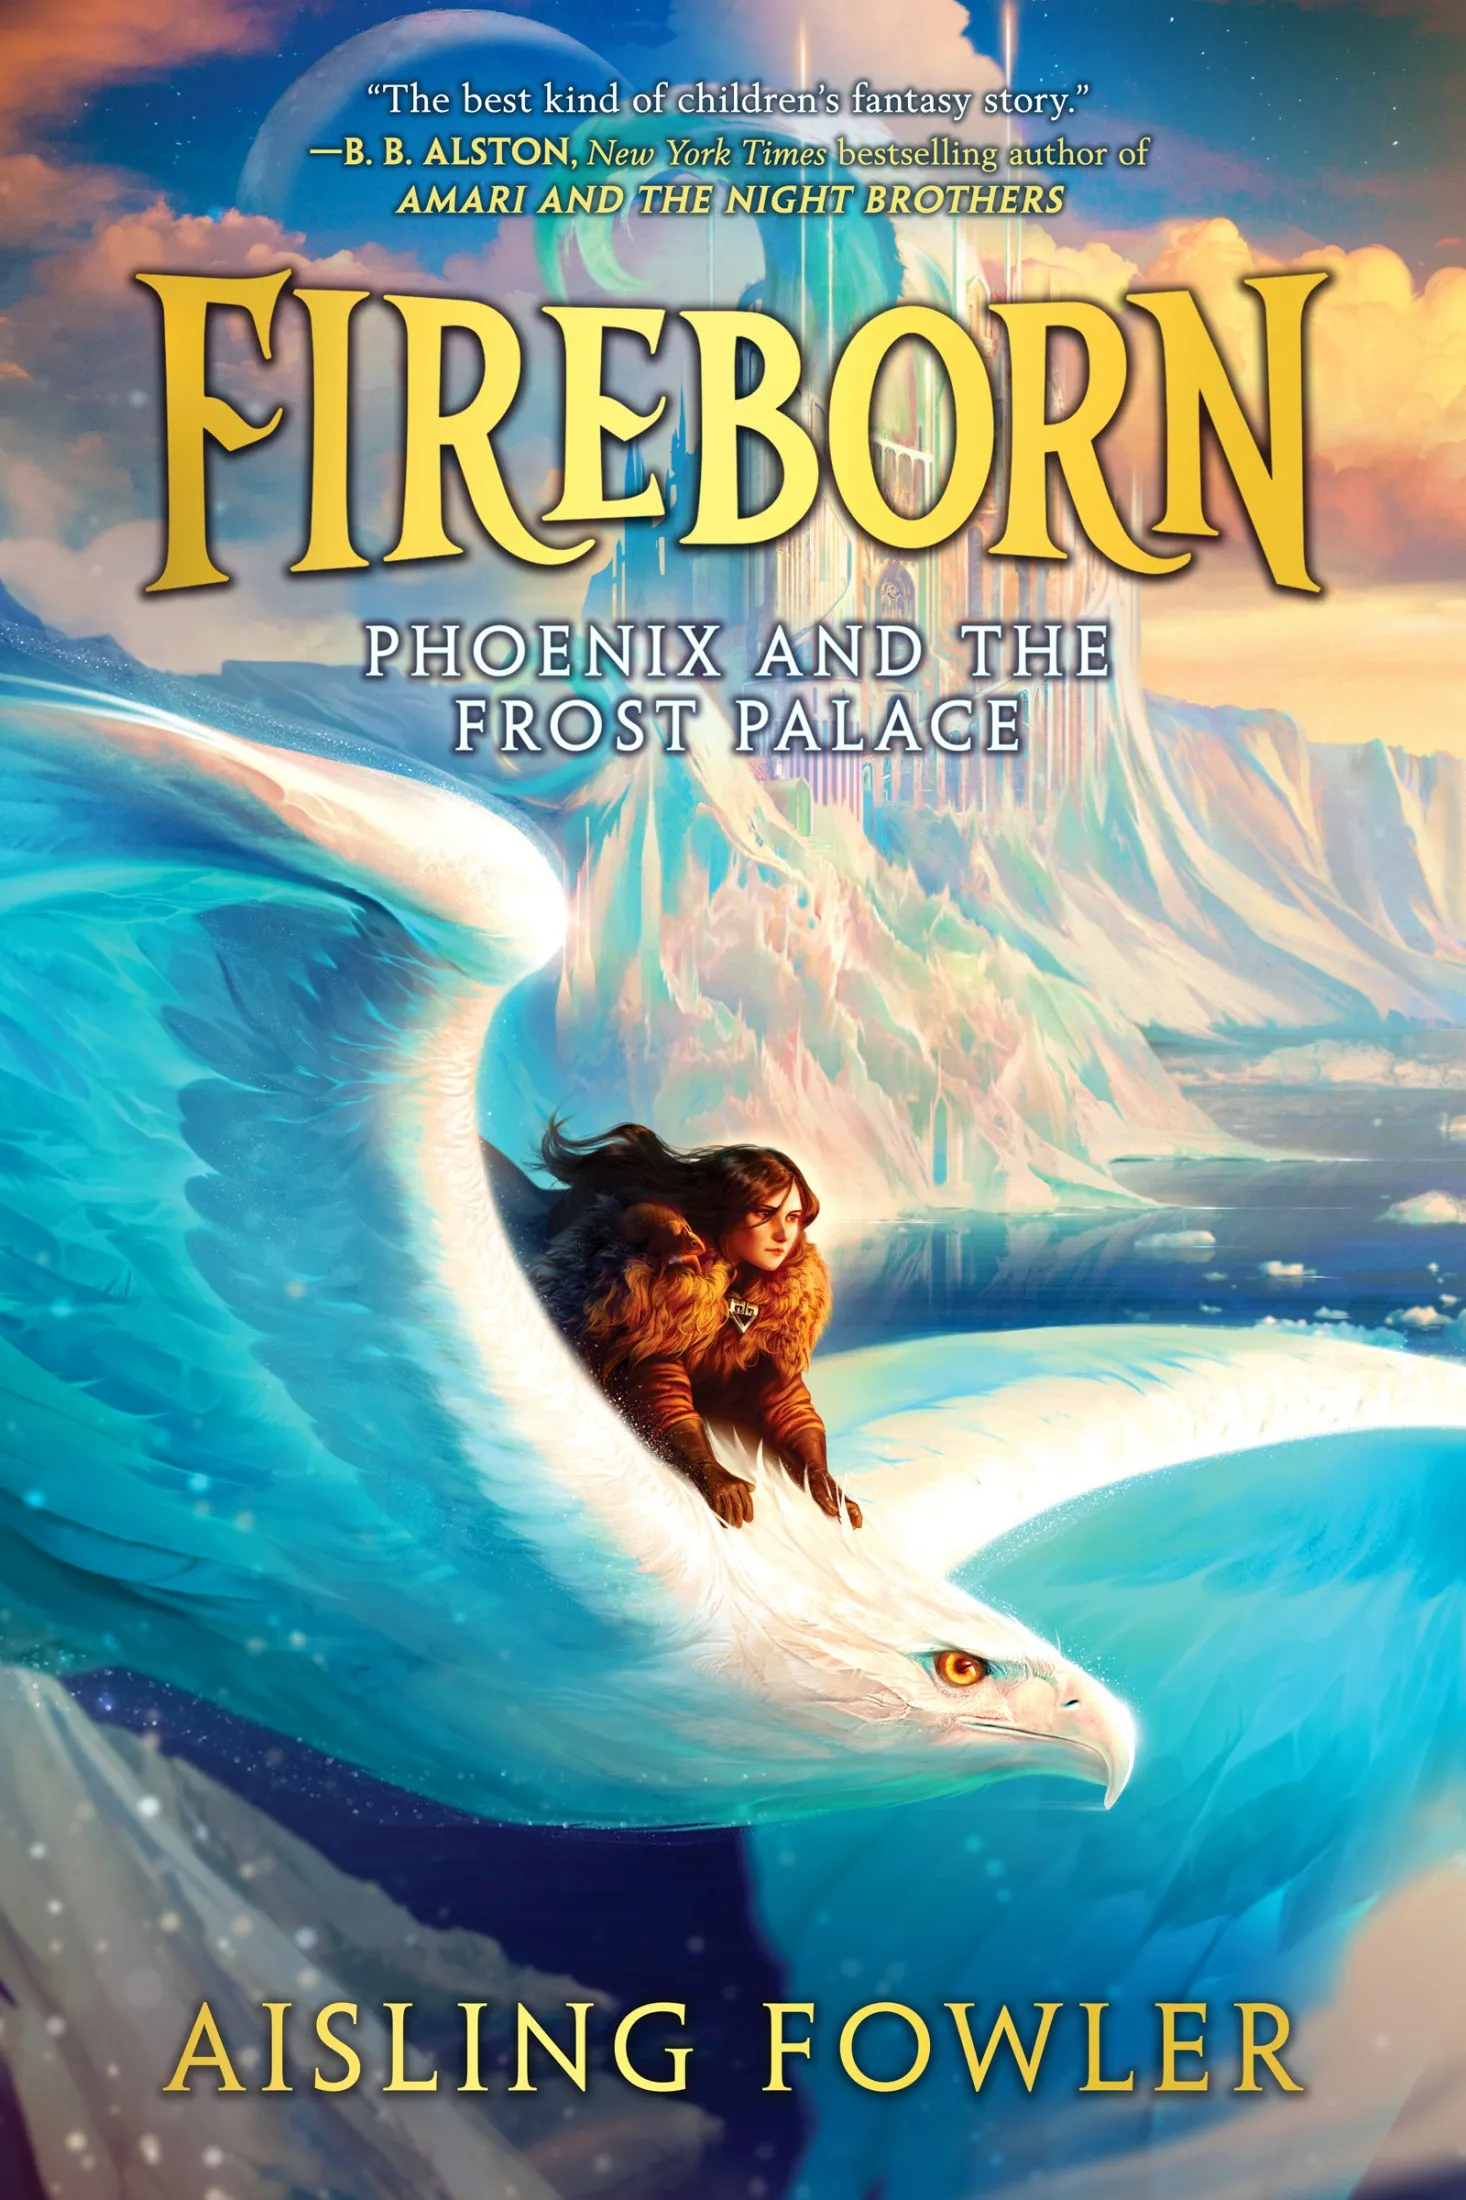 Phoenix and the Frost Palace (Fireborn #2)